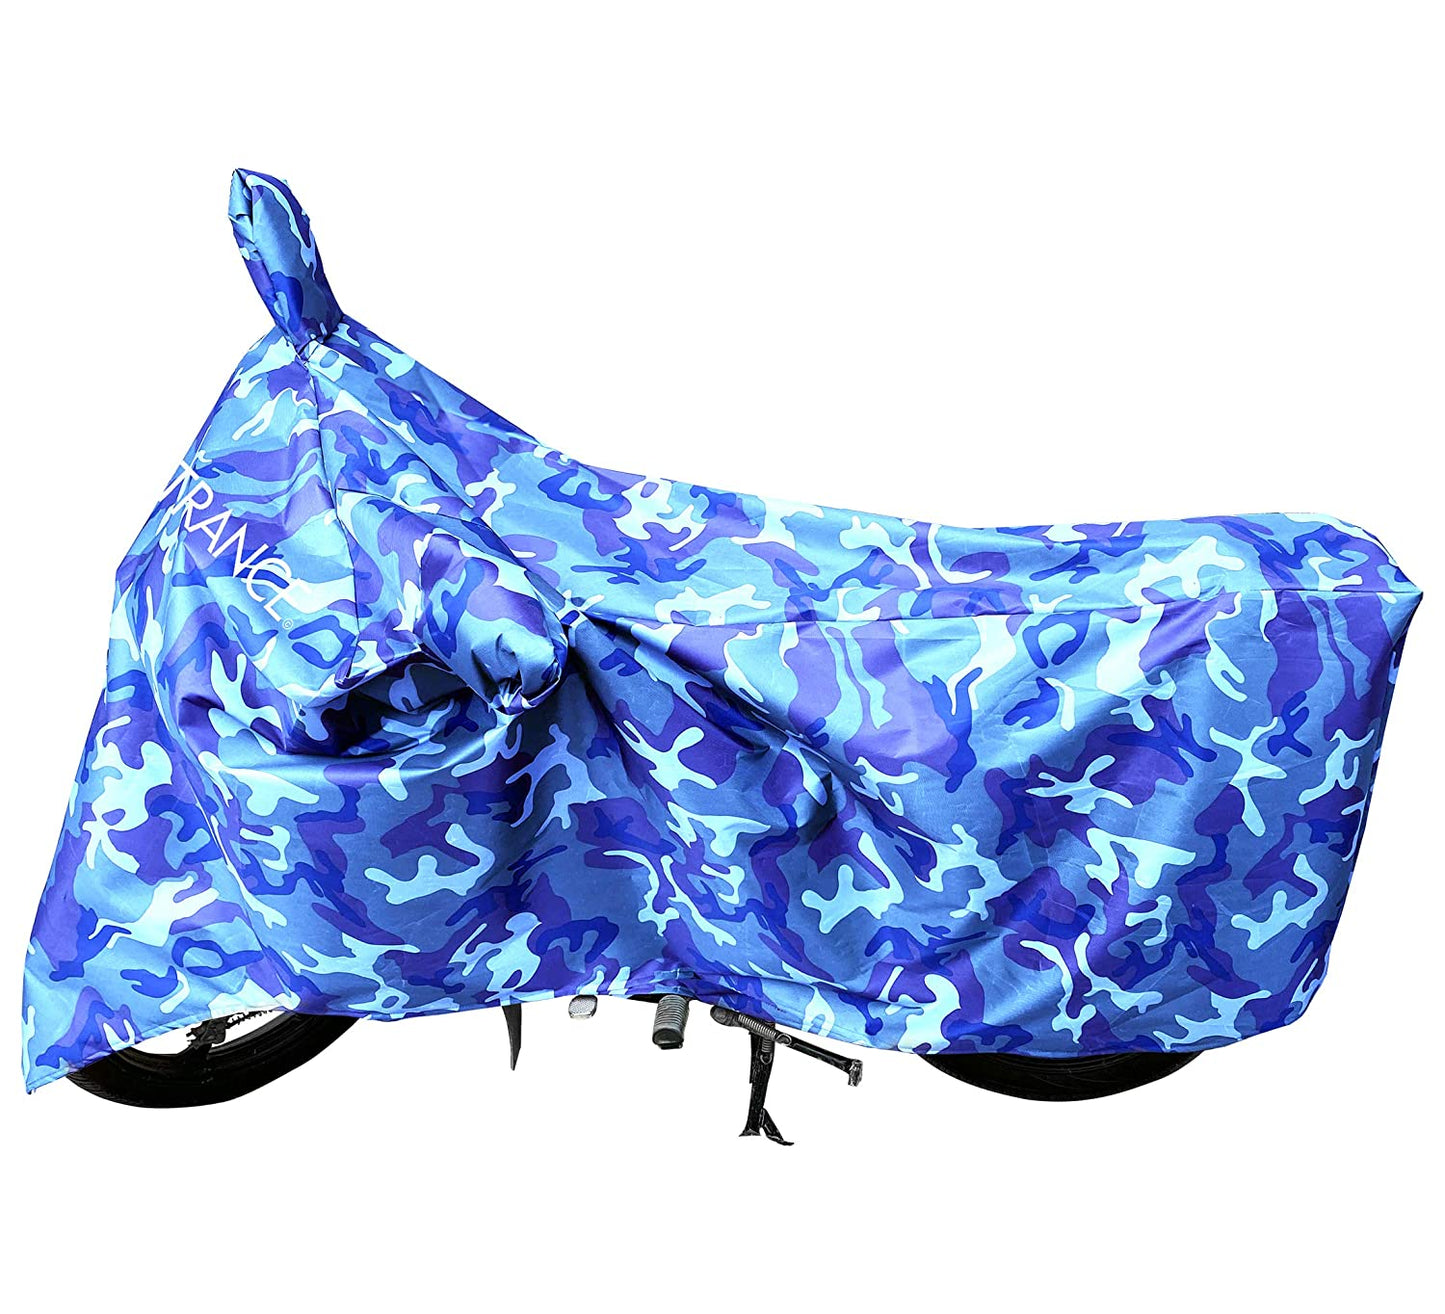 MotoTrance Jungle Bike Body Covers For Bajaj Discover 100M - Interlock-Stitched Waterproof and Heat Resistant with Mirror Pockets